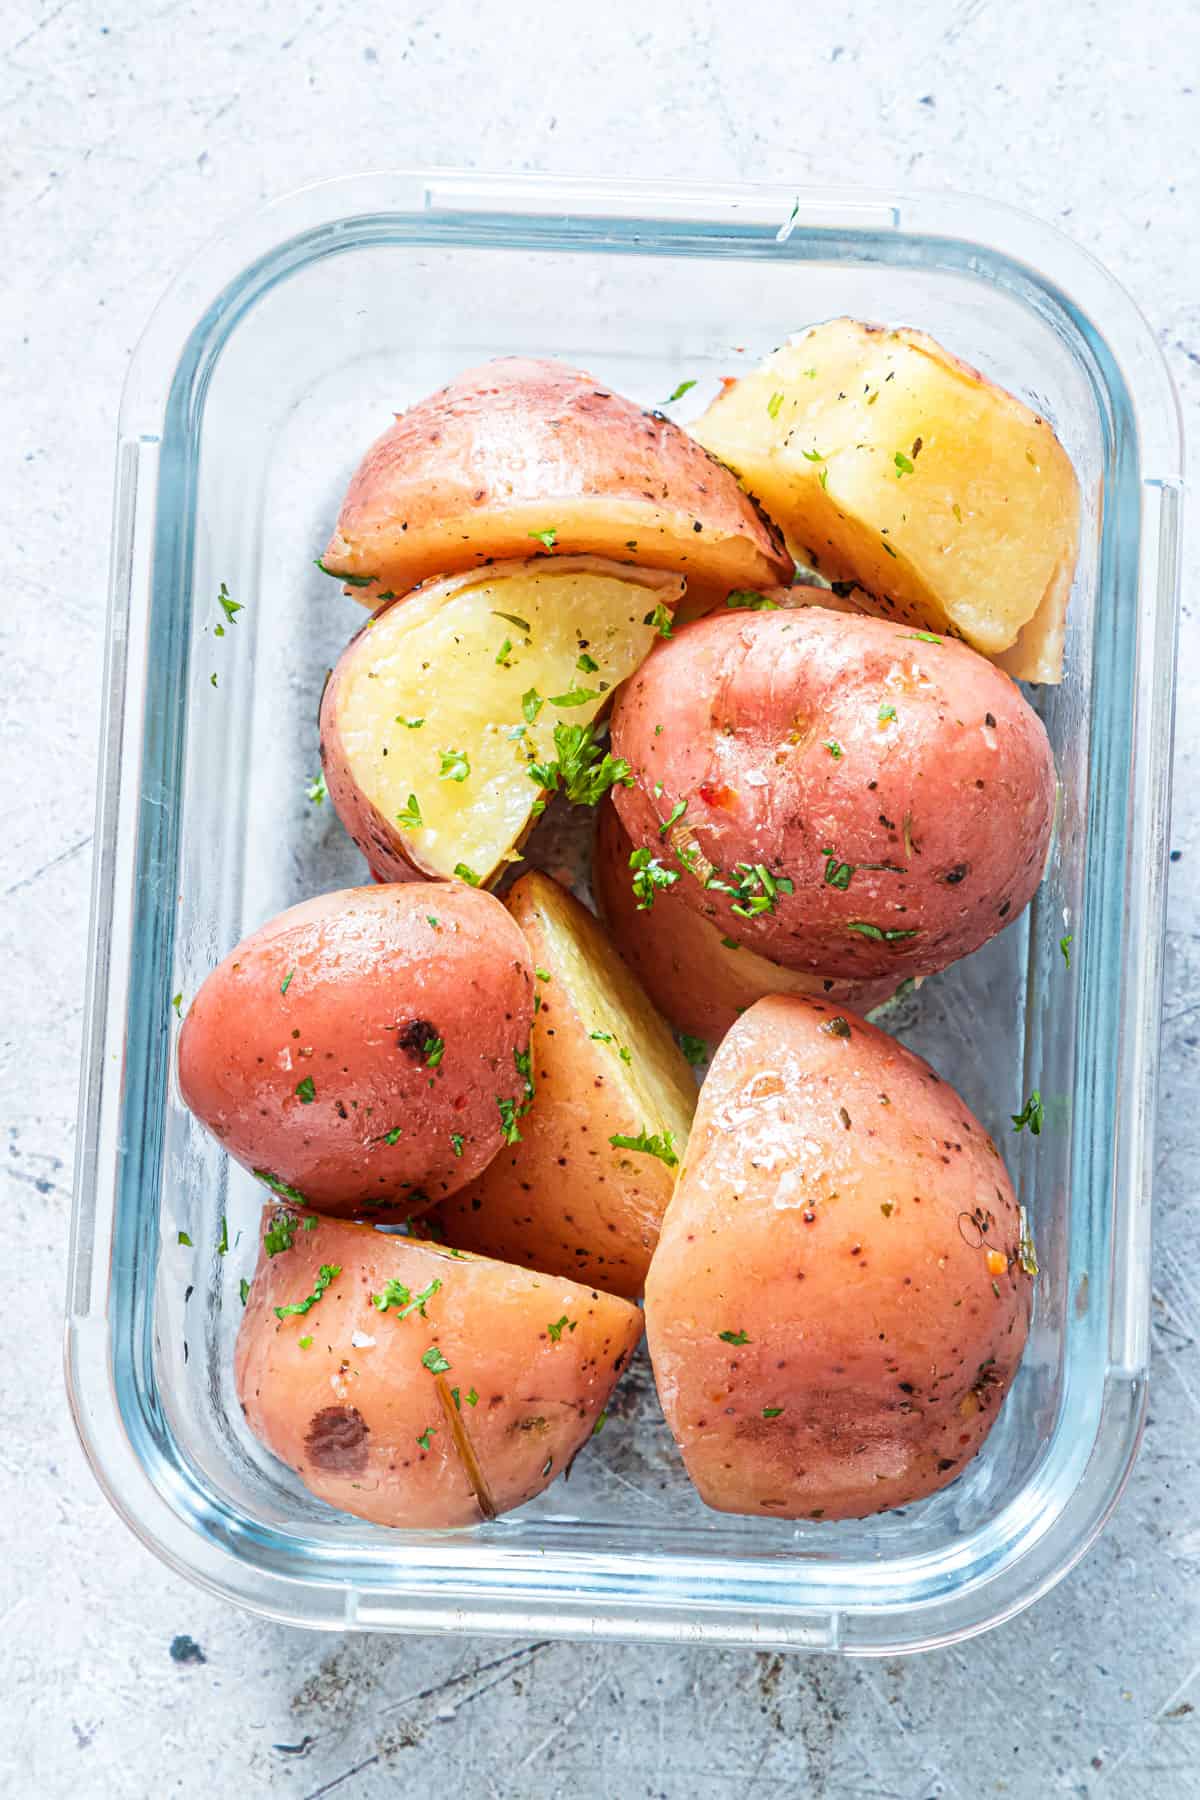 a serving of instant red potatoes in a glass container for storing food